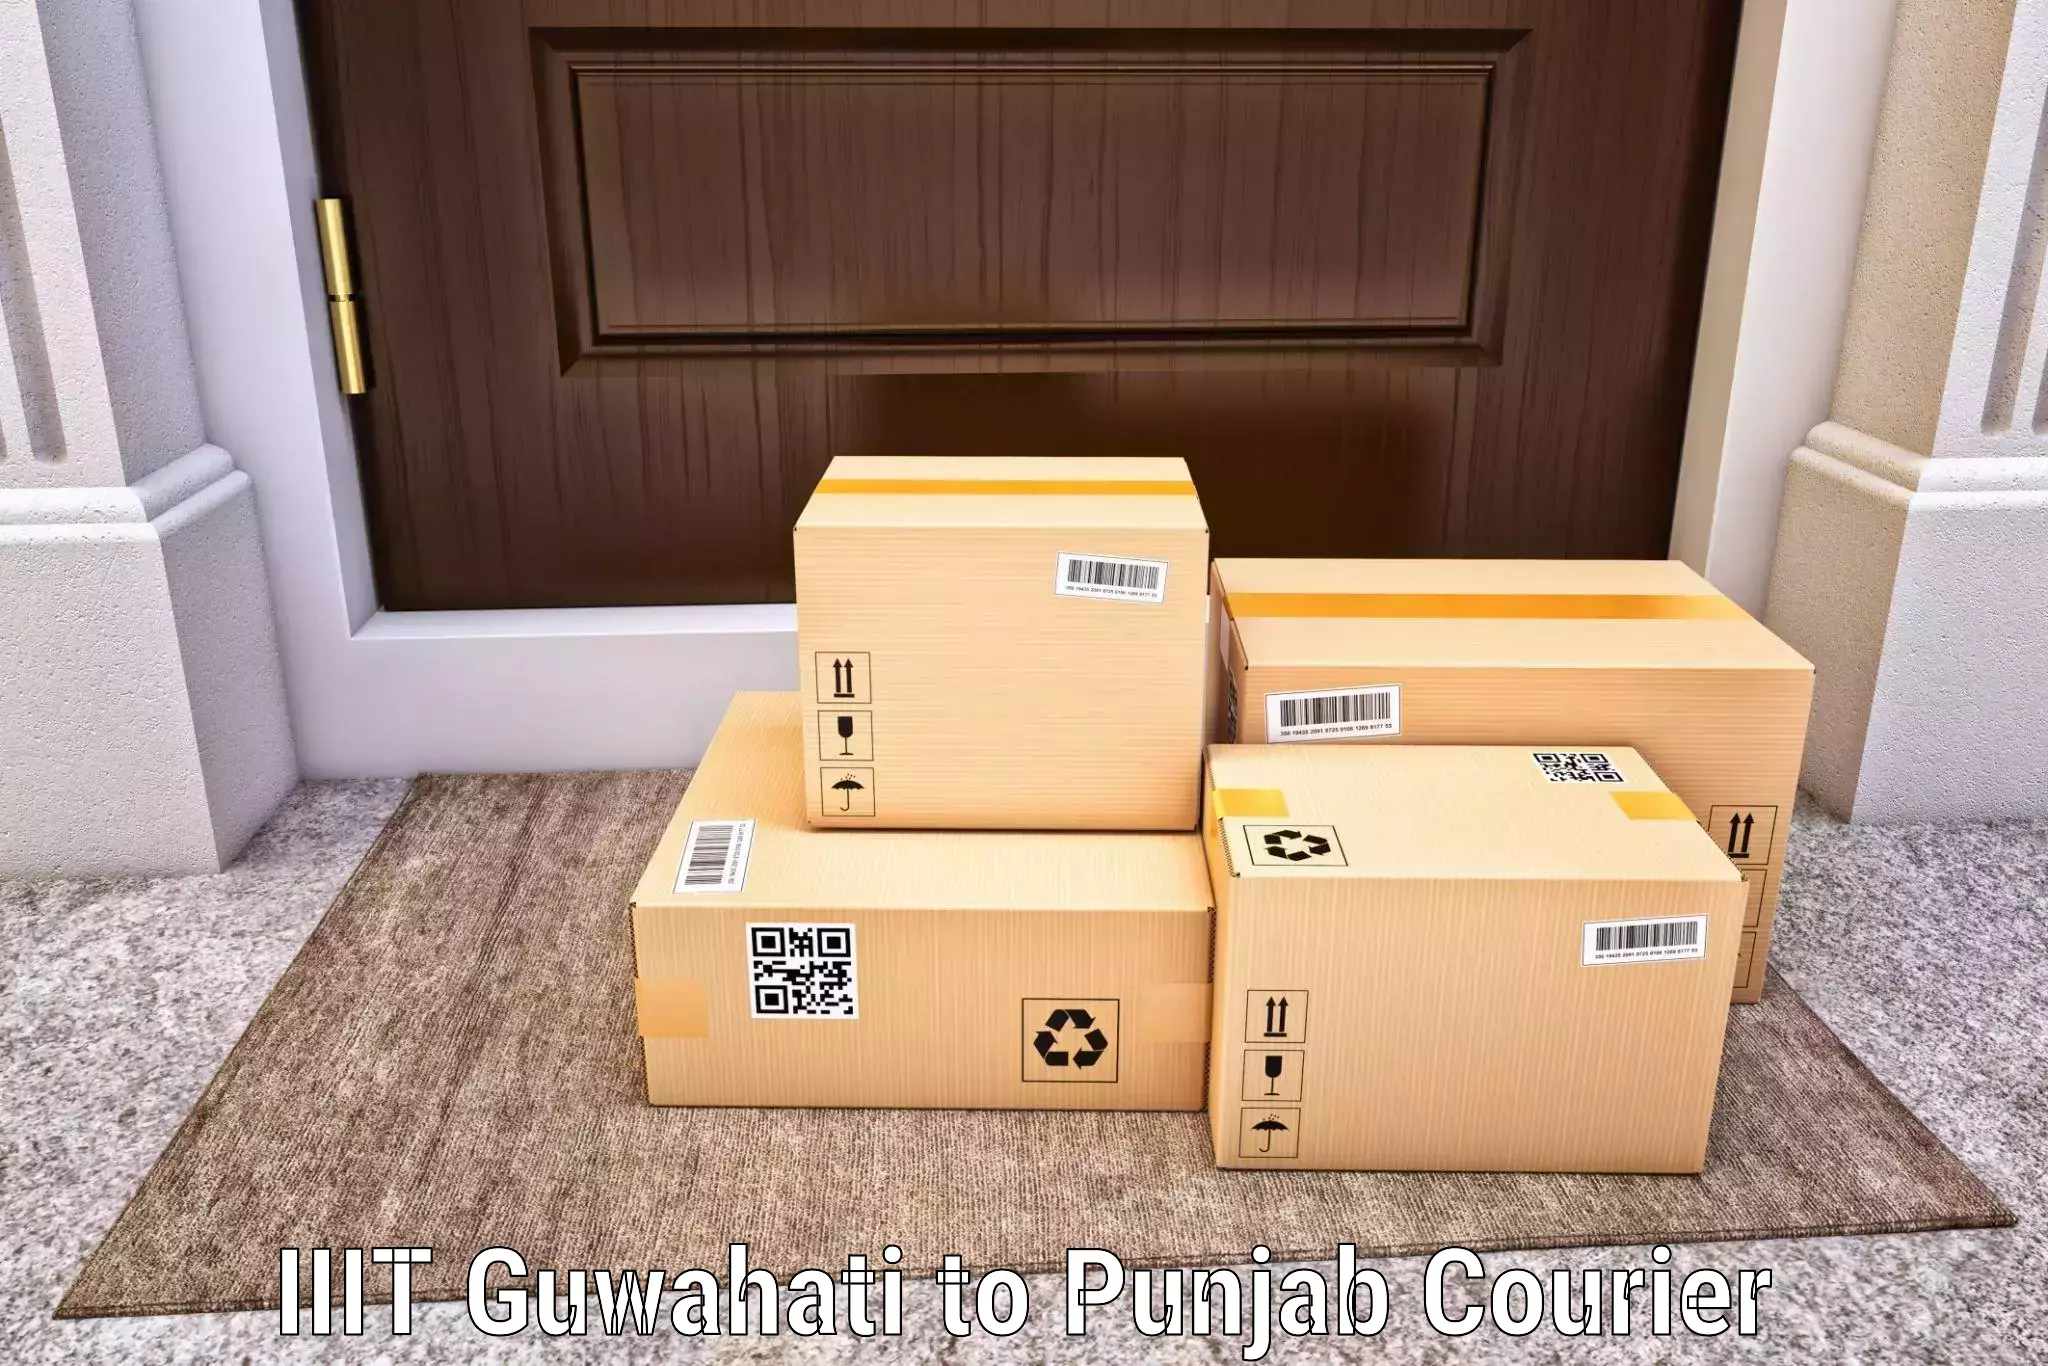 Smart parcel delivery IIIT Guwahati to Begowal